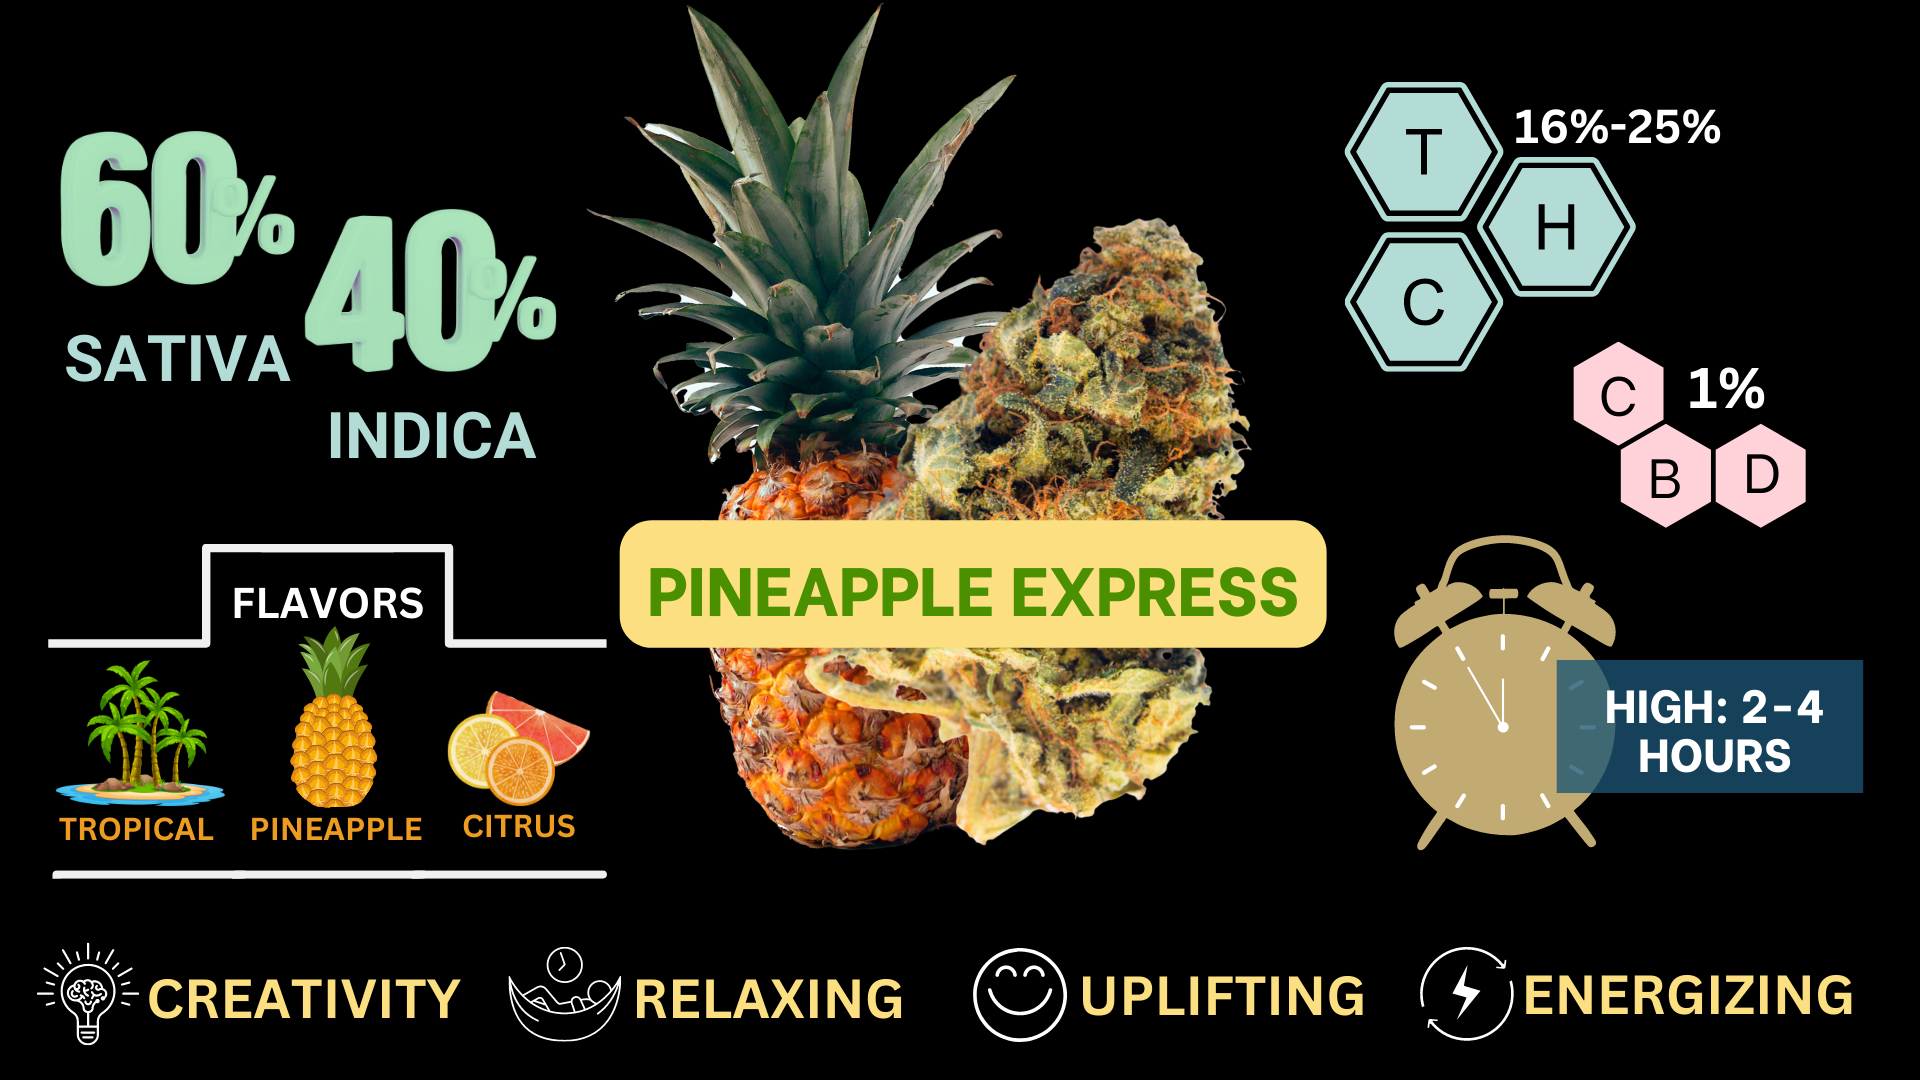 visual graphics to show pineapple express strain THC and CBD percentages, 60 % sativa, 40% indica, flavors of tropical, pineapple and citrus, the high lasts 2-4 hours, and the strains effects are creativity, relaxing, uplighting and energizing